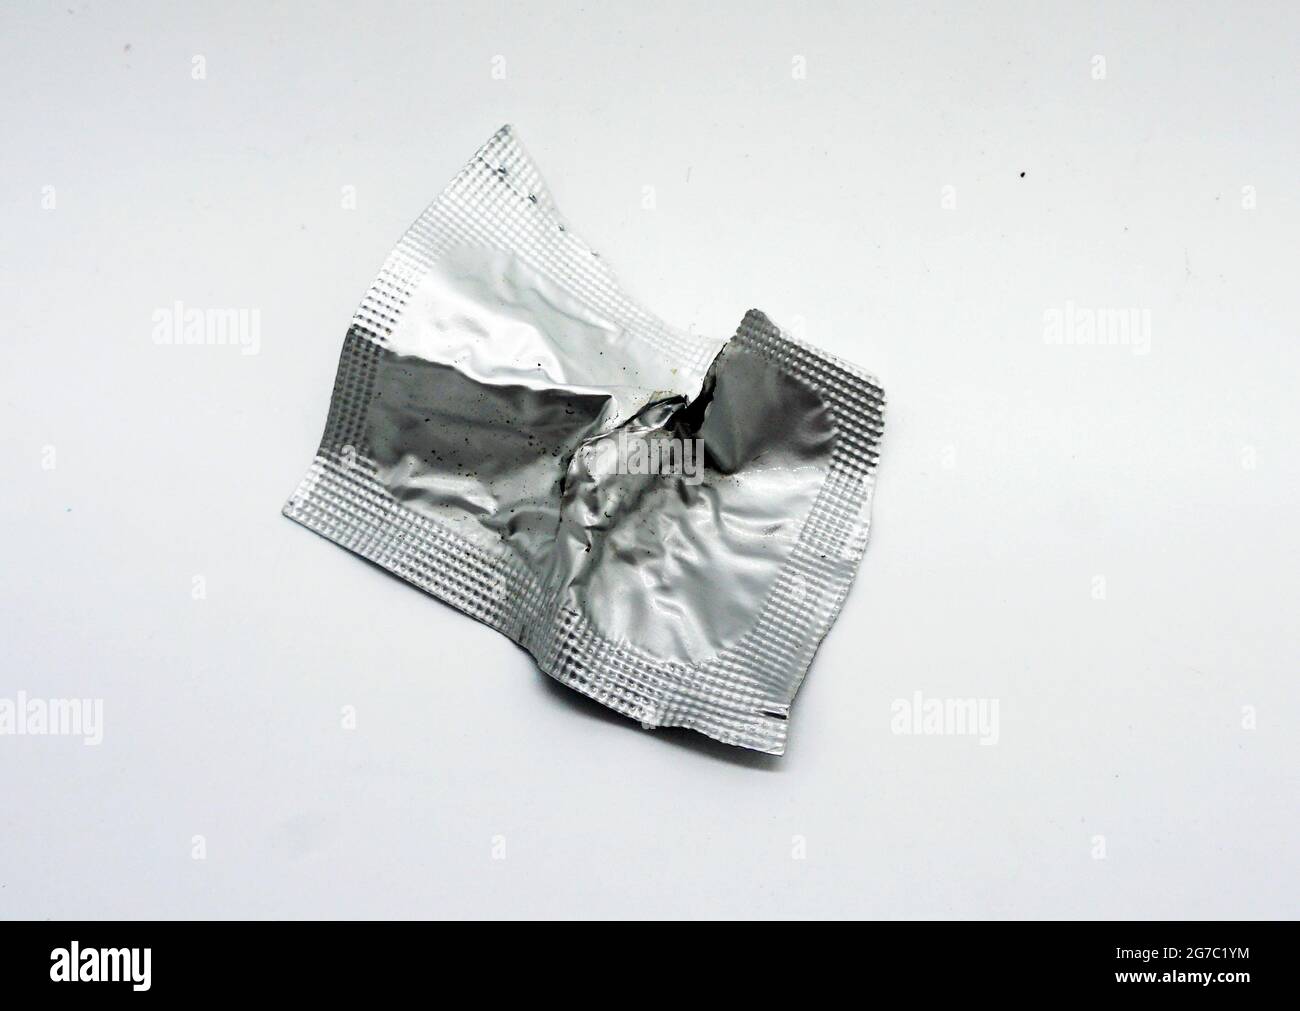 Used aluminum foil sachets will be disposed of in the trash. Stock Photo